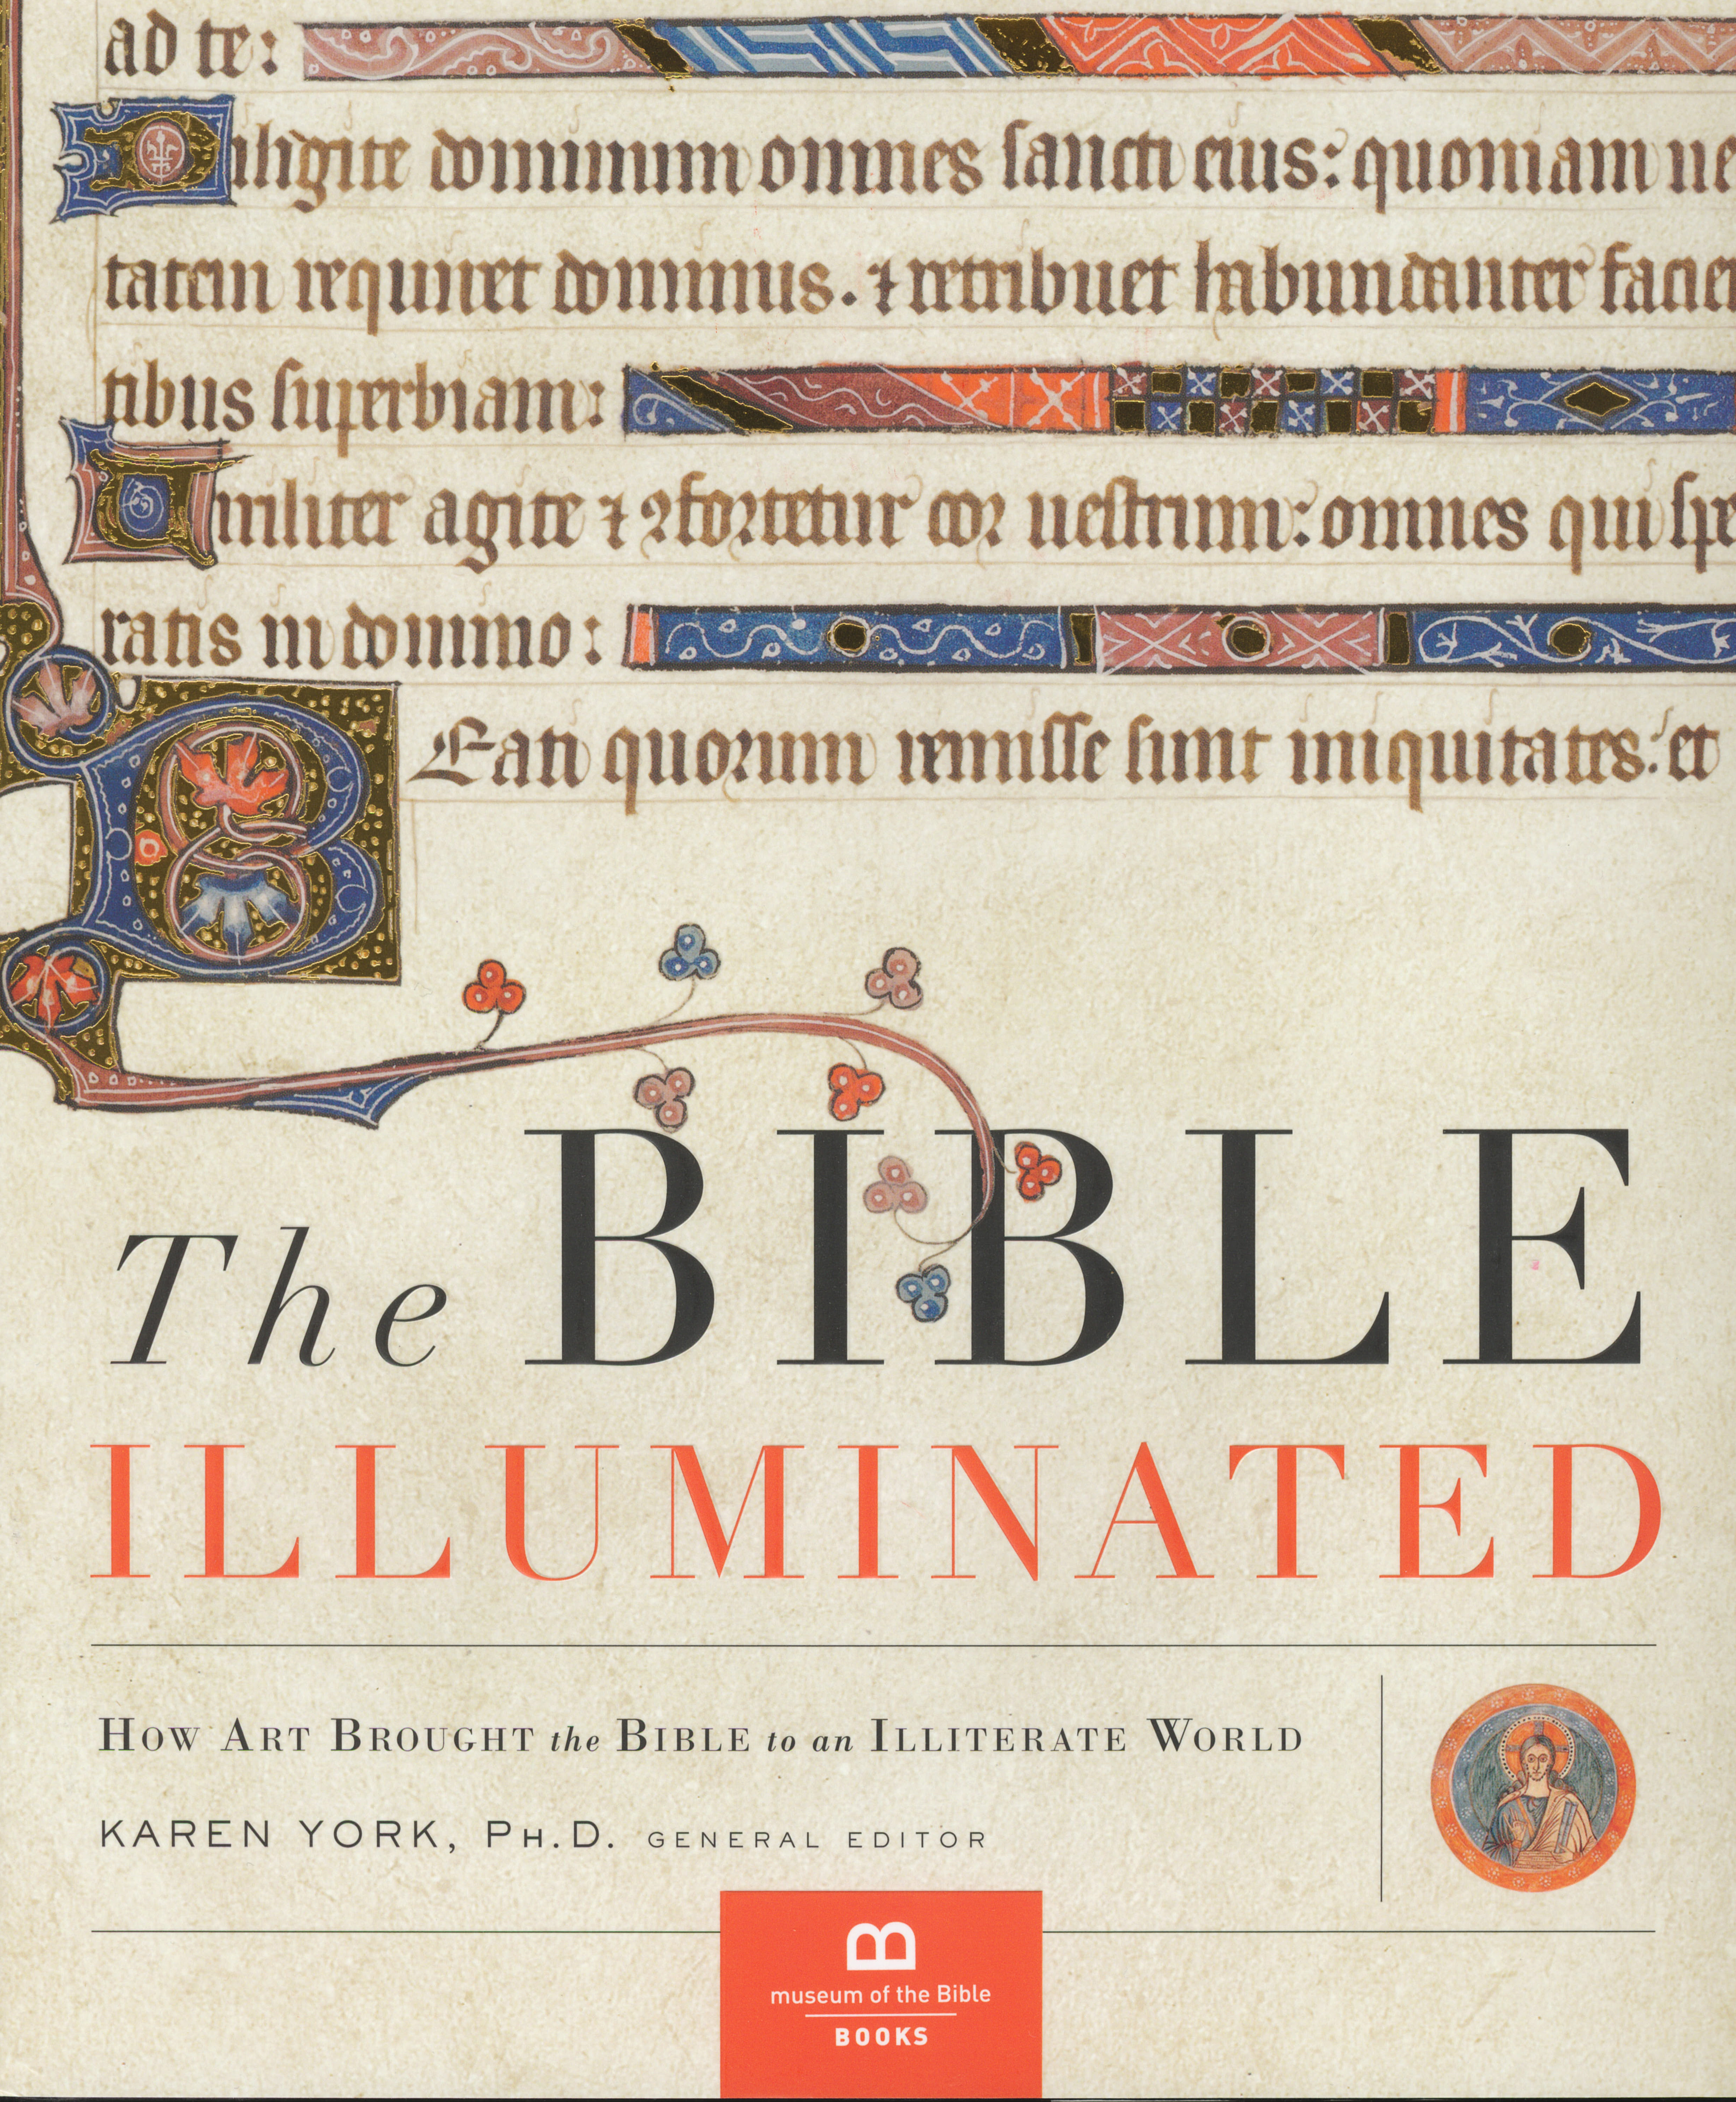 The Bible Illuminated: How Art Brought the Bible to an Illiterate World edited by Karen York ISBN:1945470127  EAN: 9781945470127